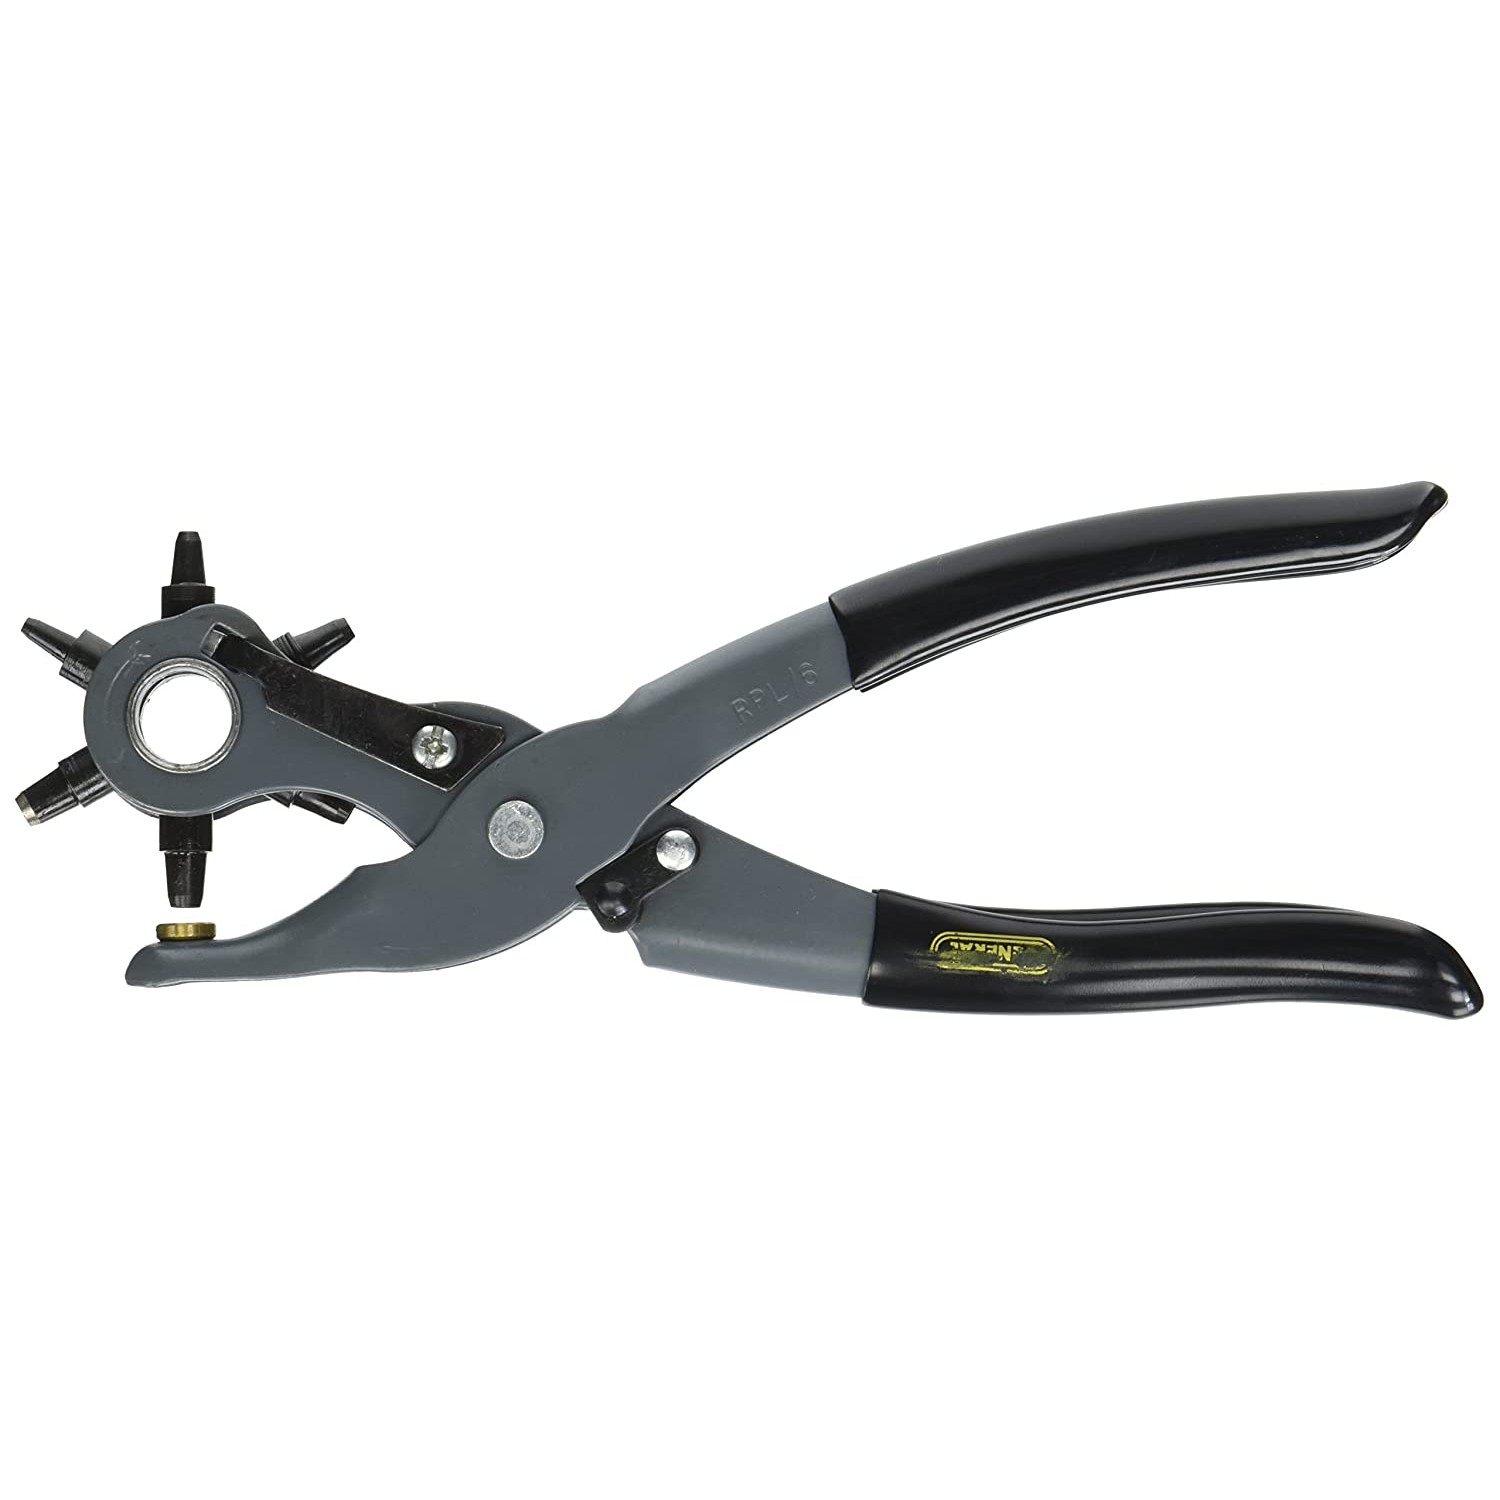 General Tools 72 Revolving Punch Plier - image 2 of 2